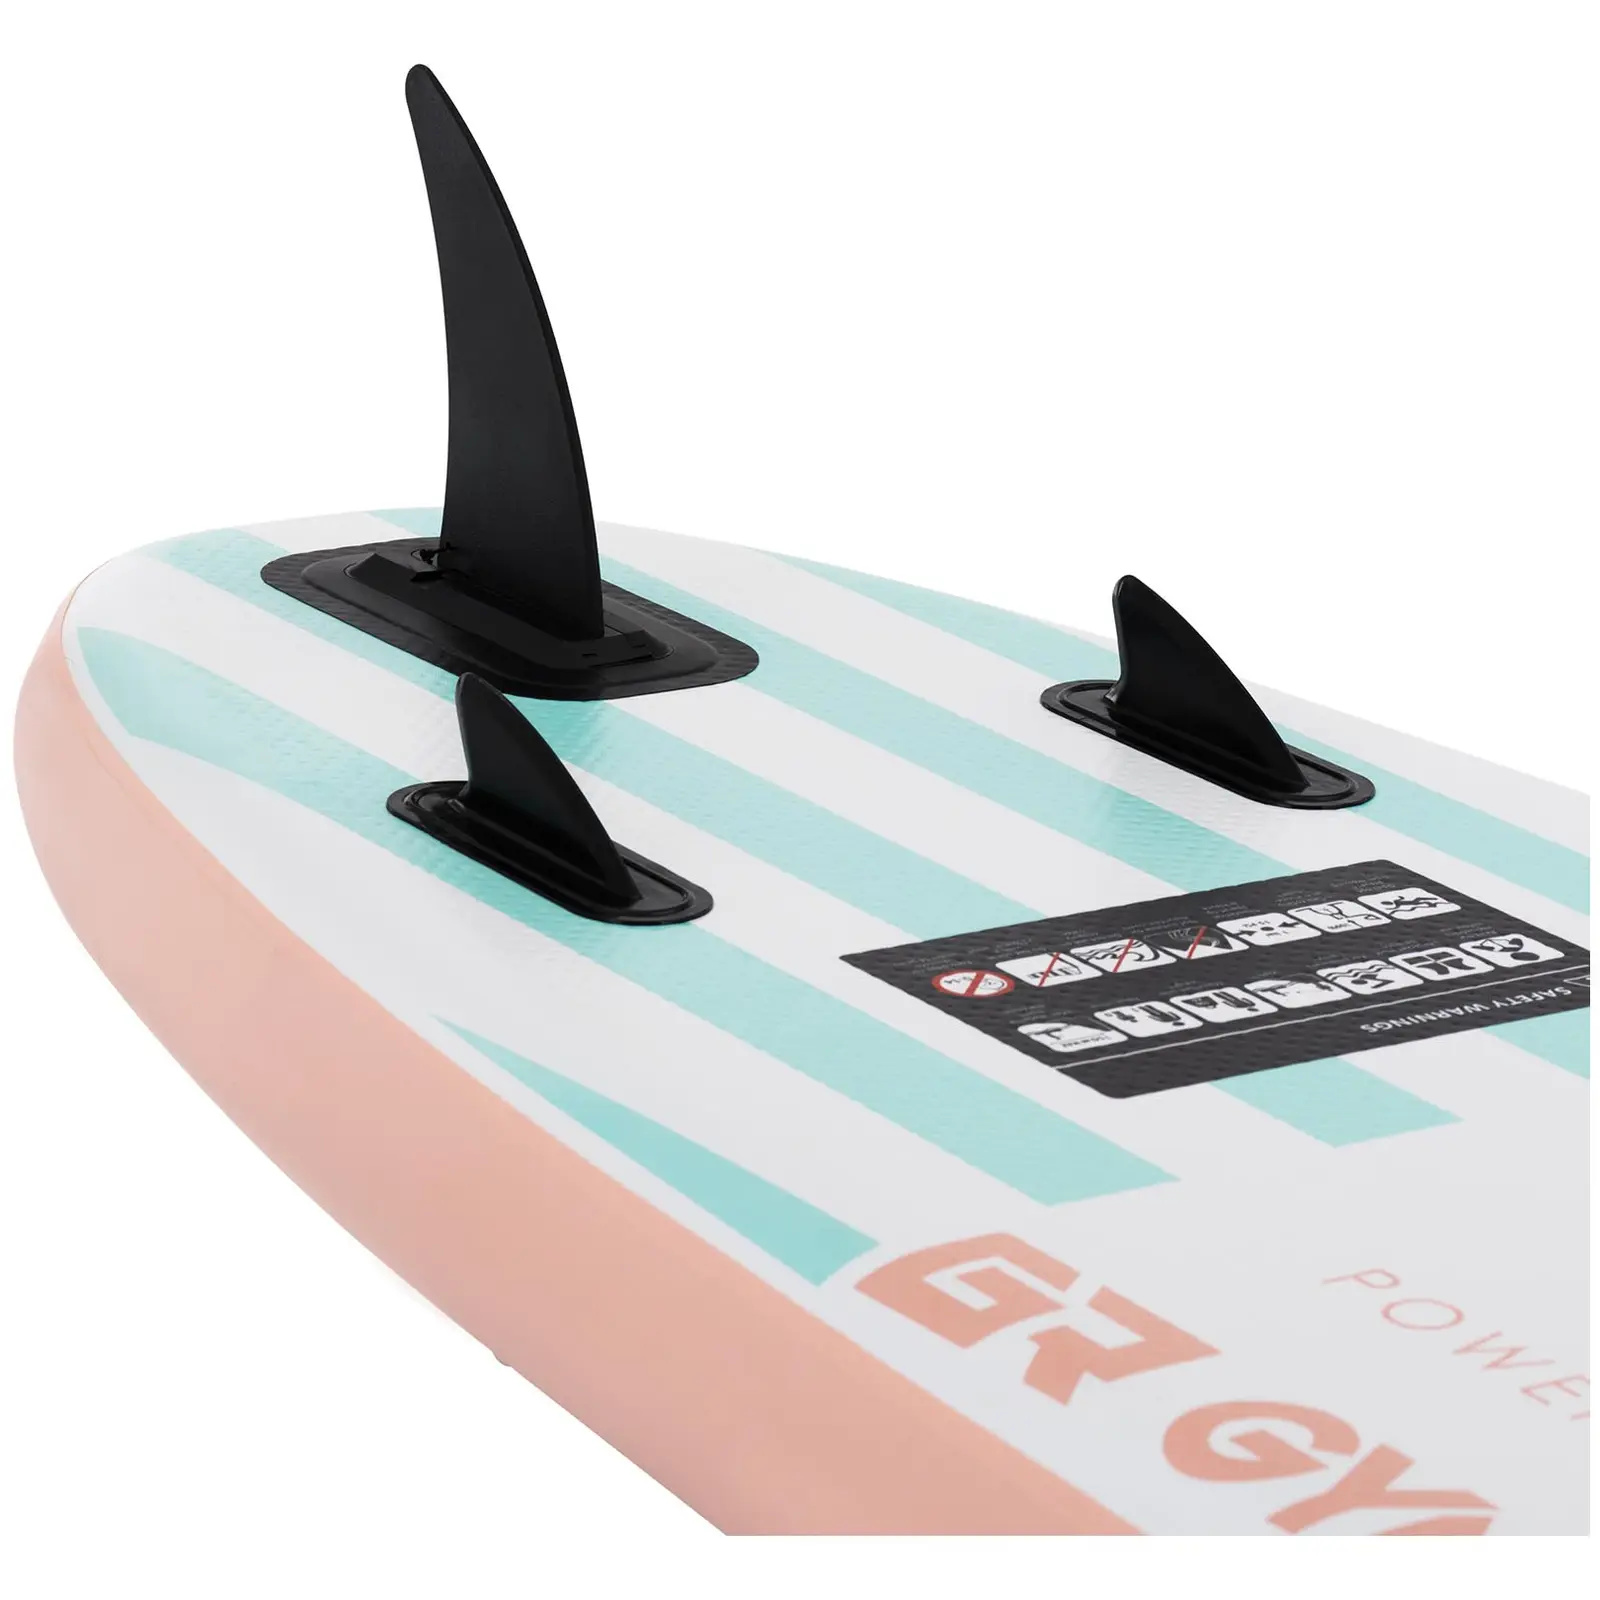 Inflatable SUP Board - 100 kg - inflatable - mint